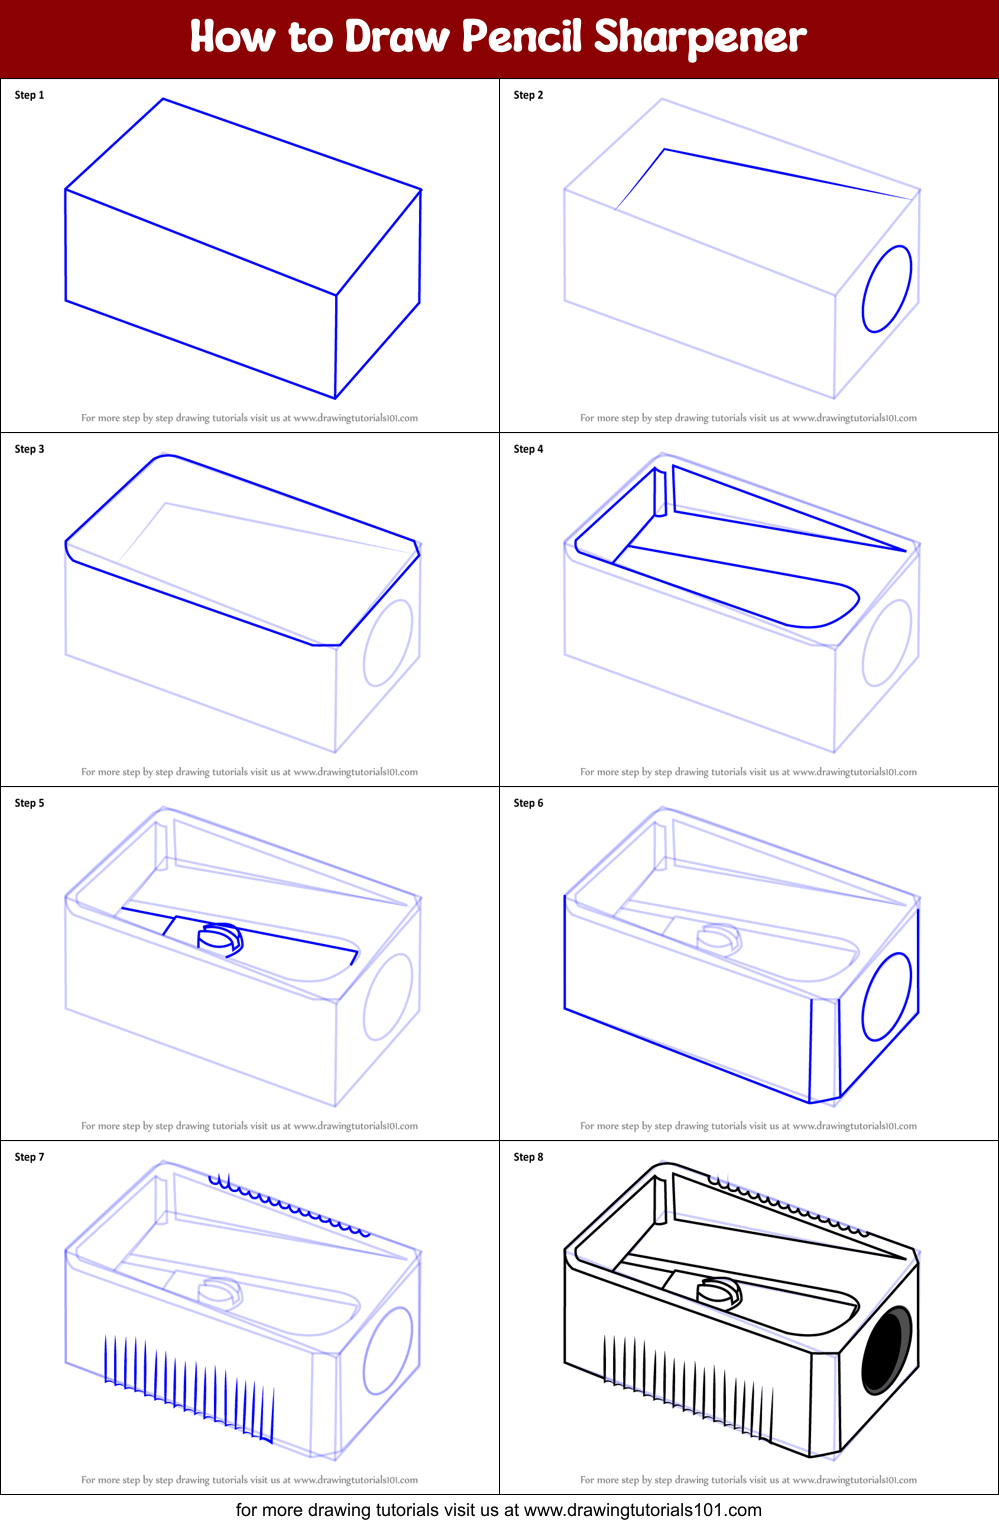 How to Draw Pencil Sharpener printable step by step drawing sheet